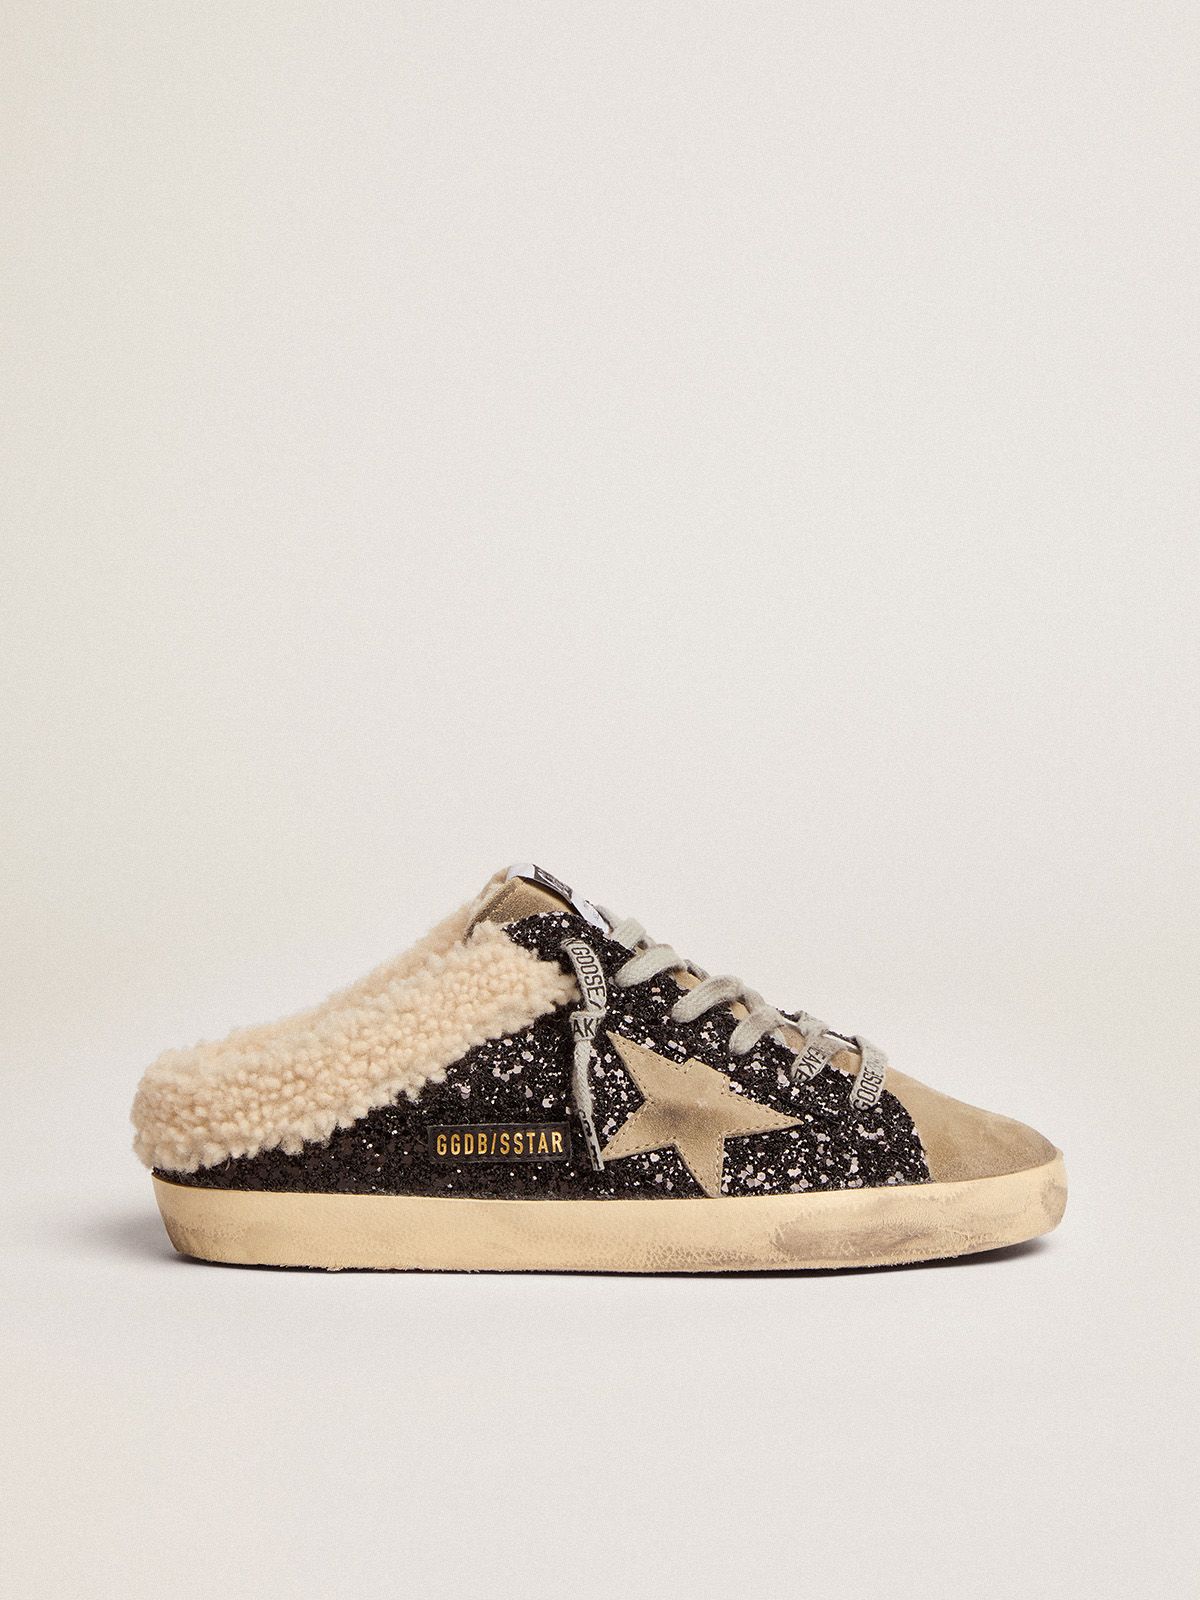 Sneakers Uomo Golden Goose Super-Star Sabots LTD in black glitter with dove-gray suede star and shearling lining